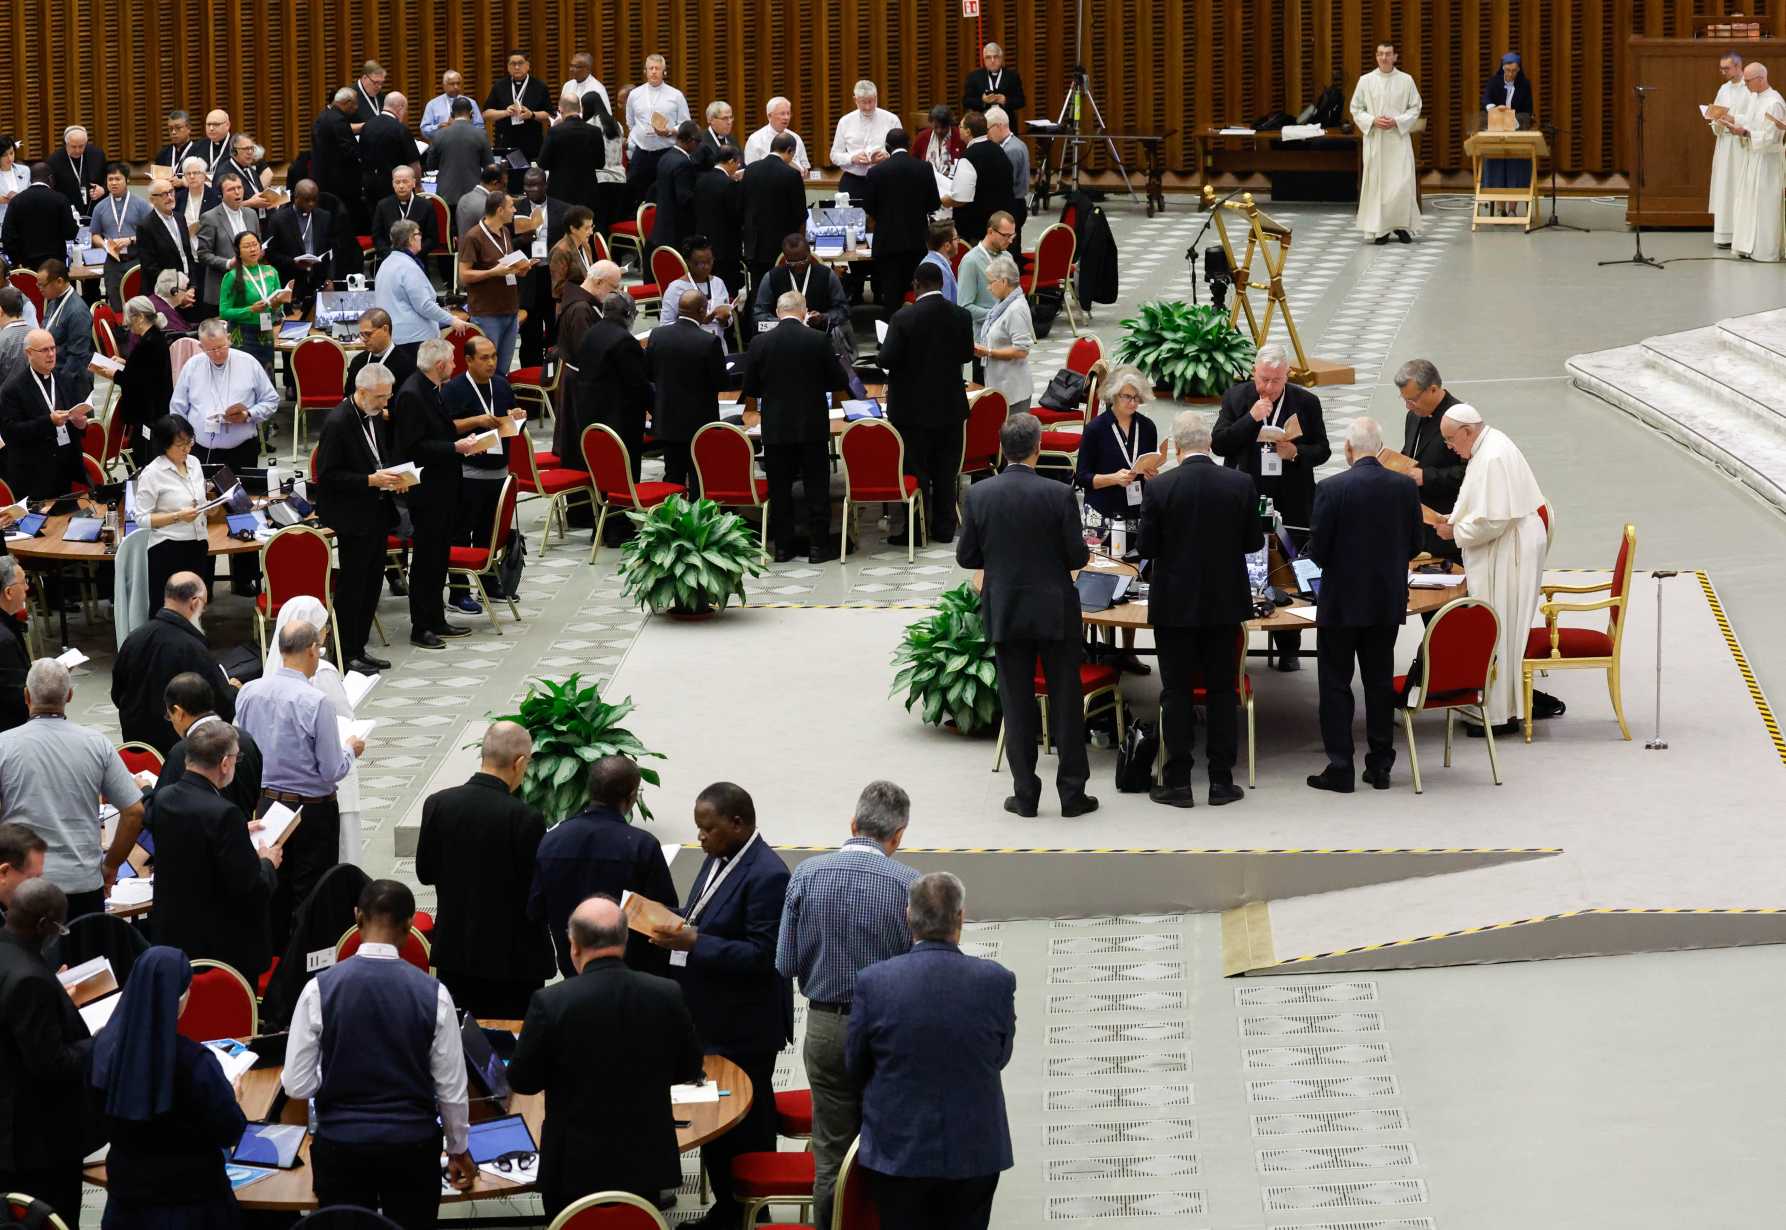 Ripple effect: Delegates discuss synod impact beyond Catholicism